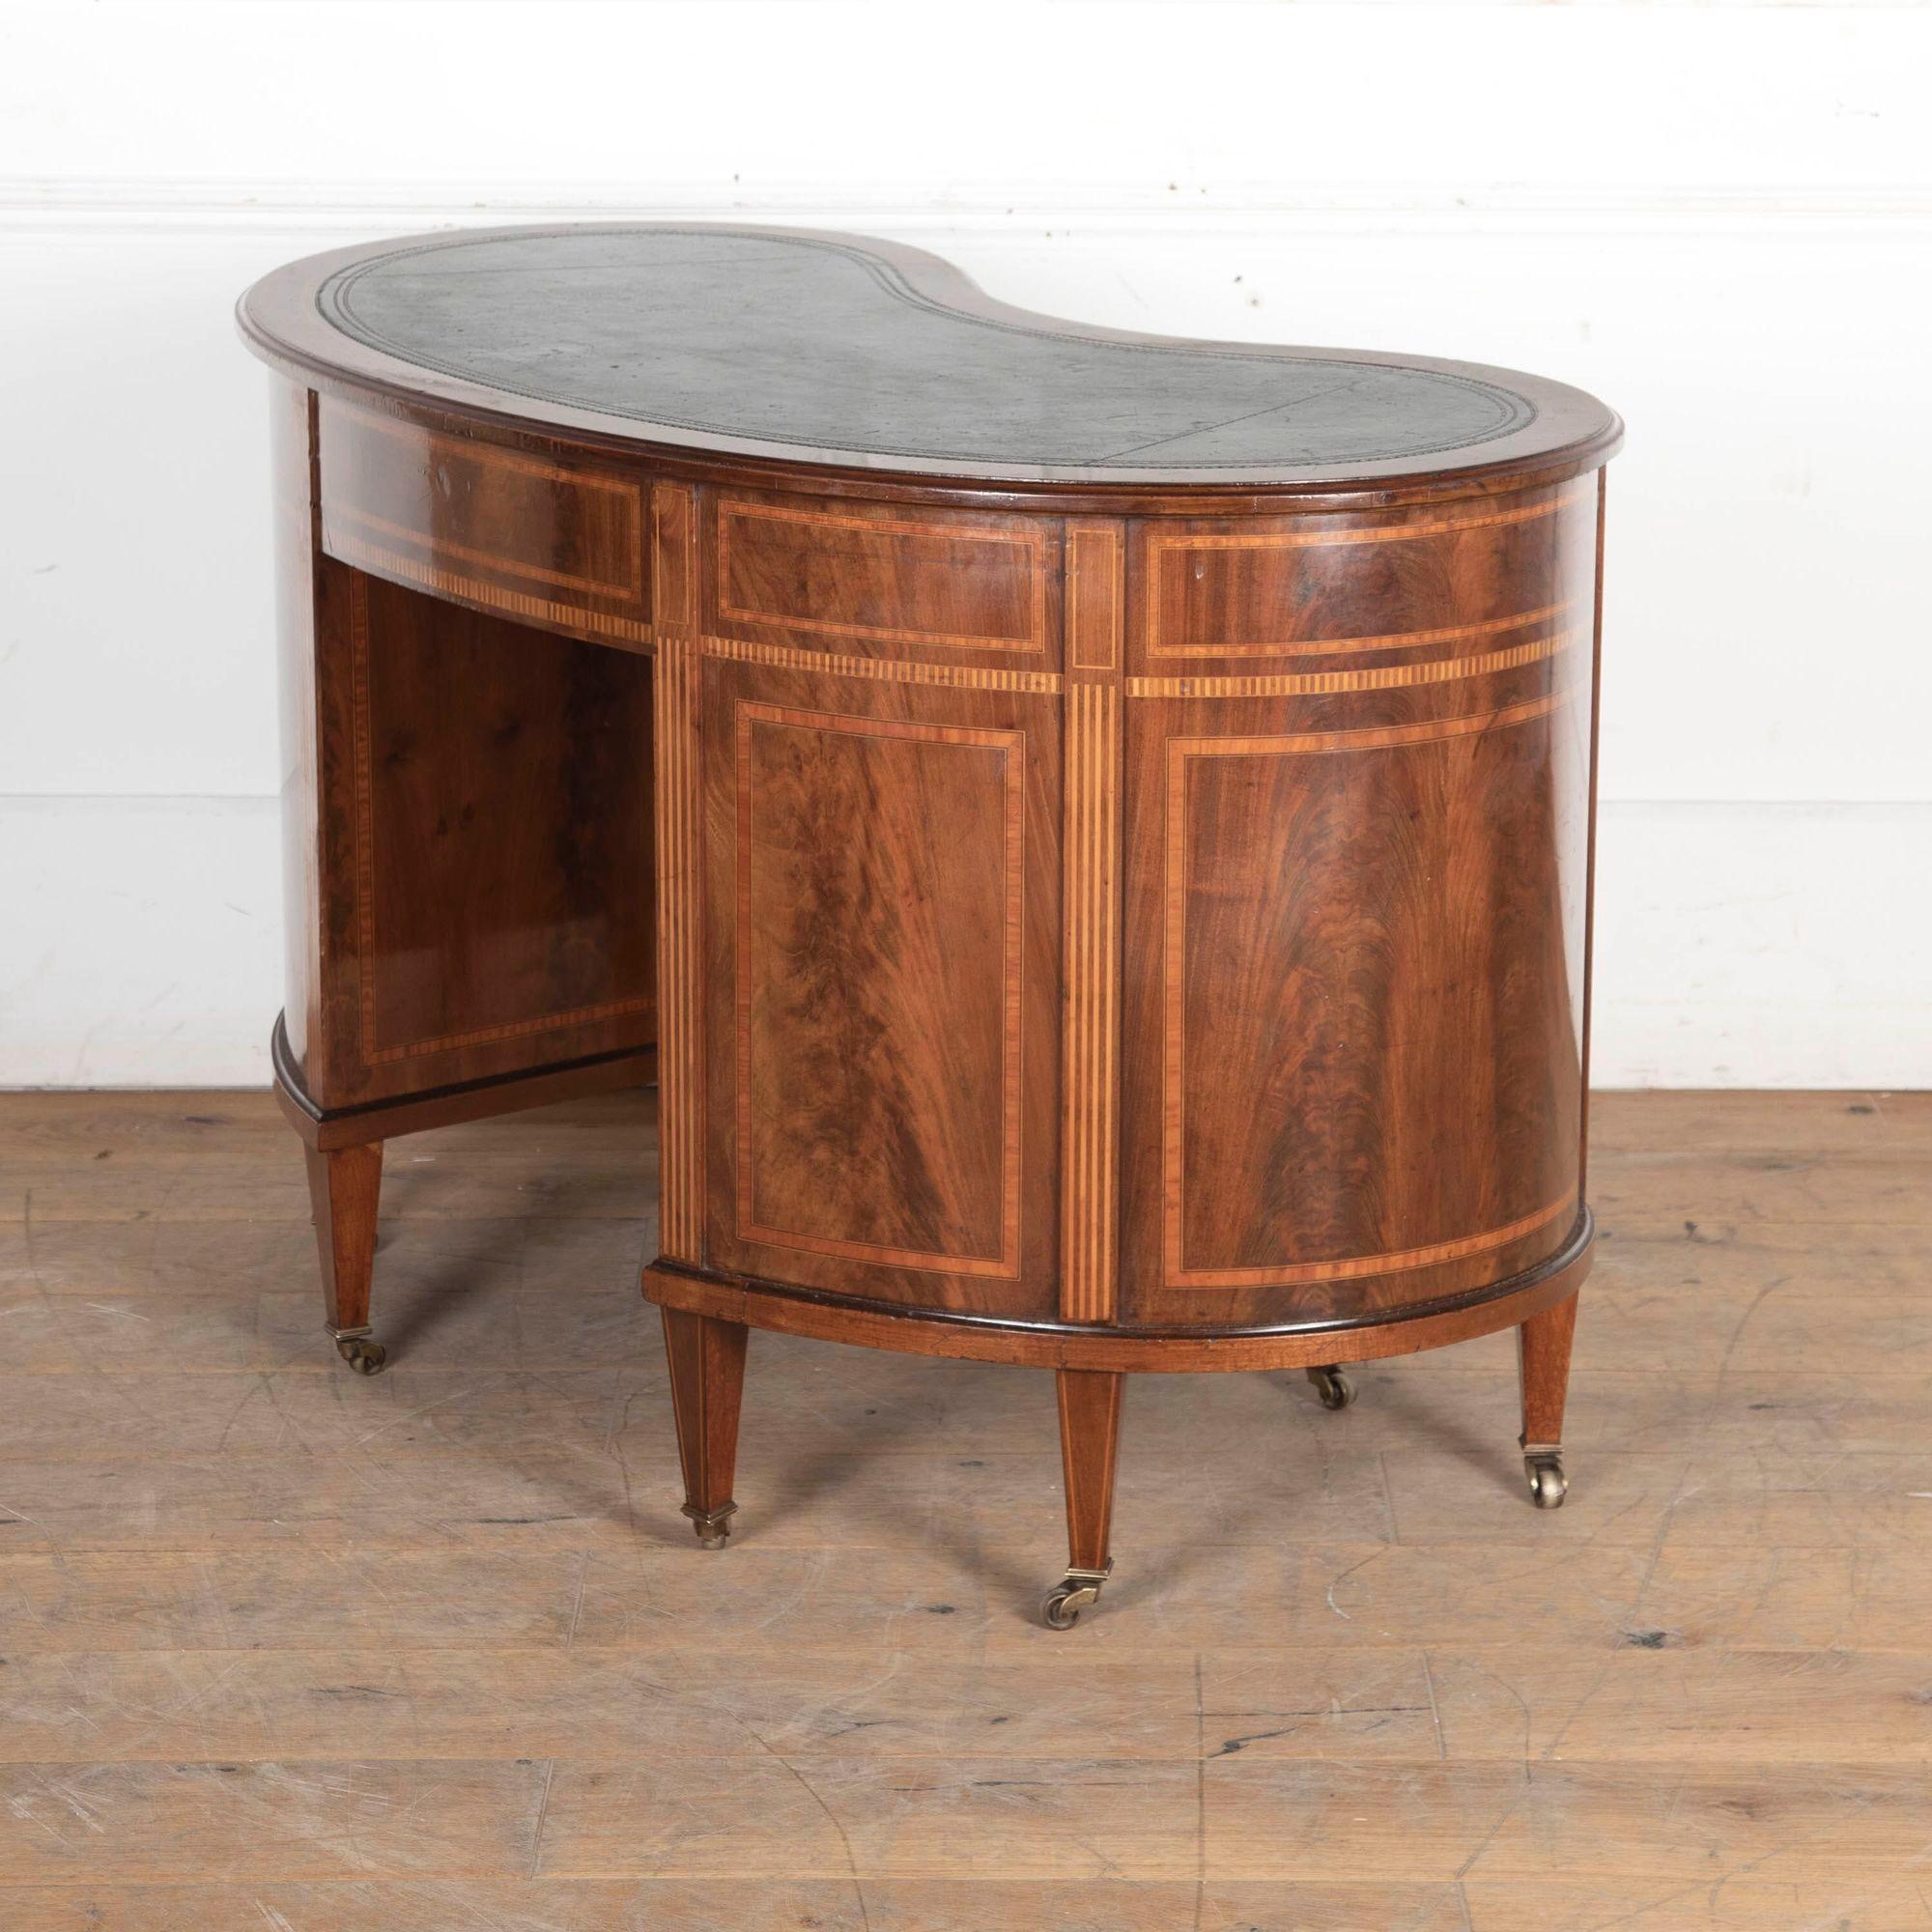 20th Century Edwardian Kidney Shaped Desk In Good Condition For Sale In Gloucestershire, GB